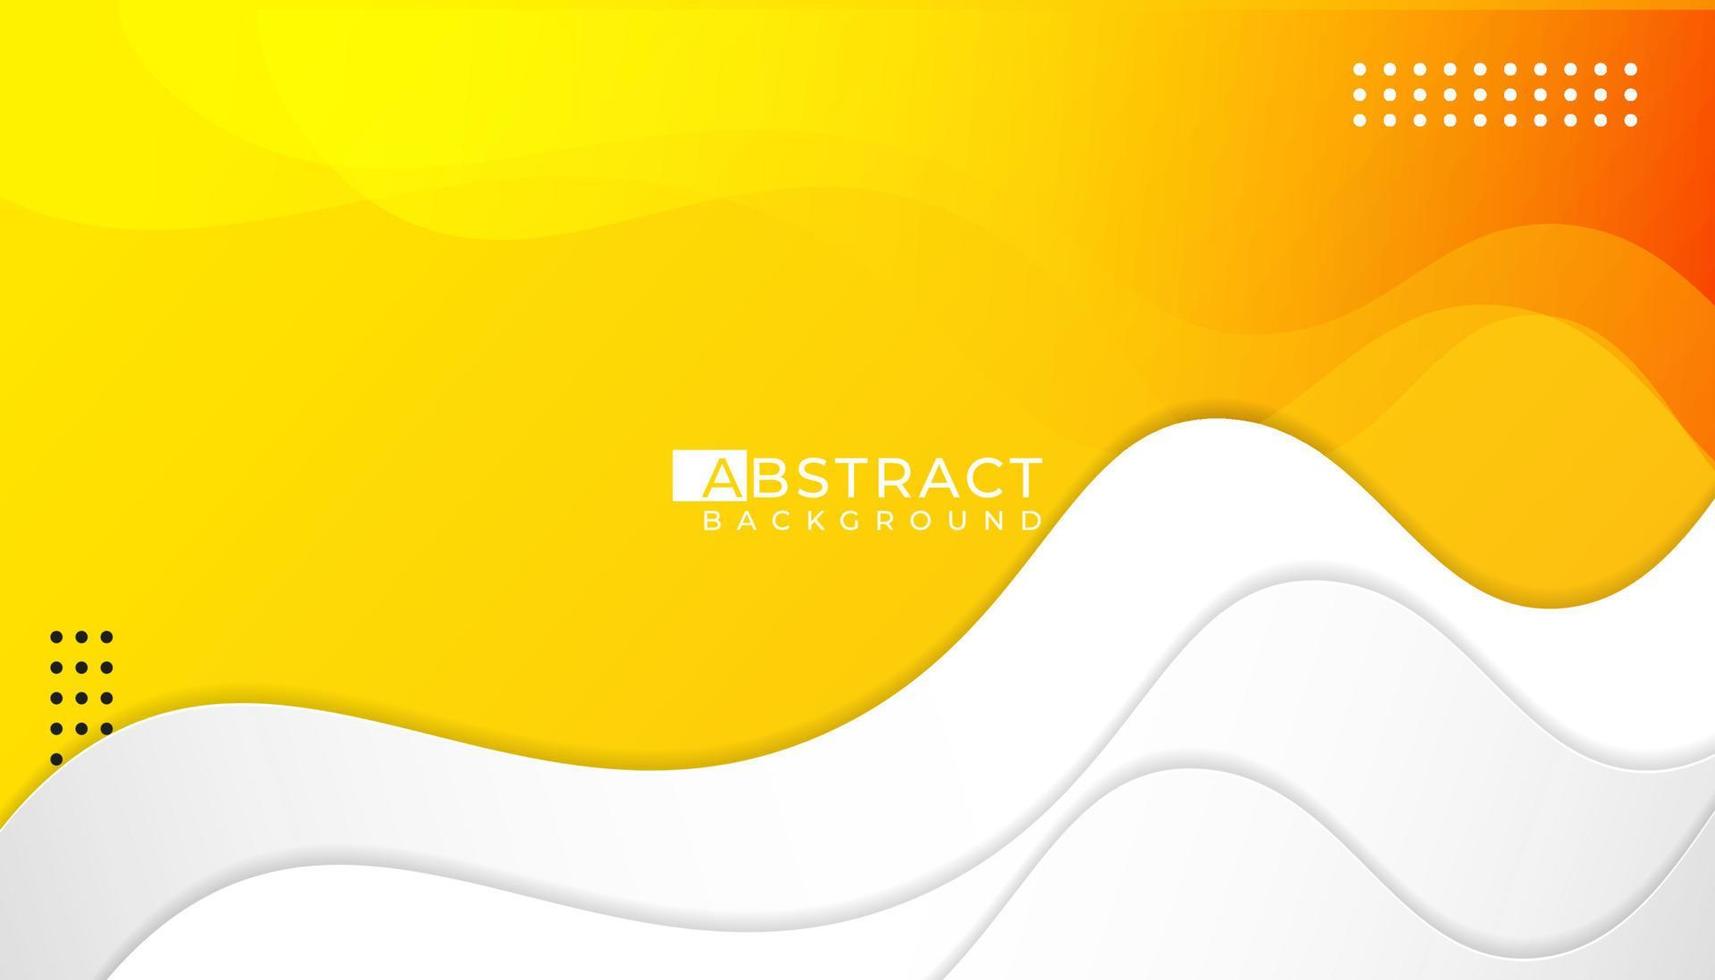 Abstract background with wave yellow and grey colour vector